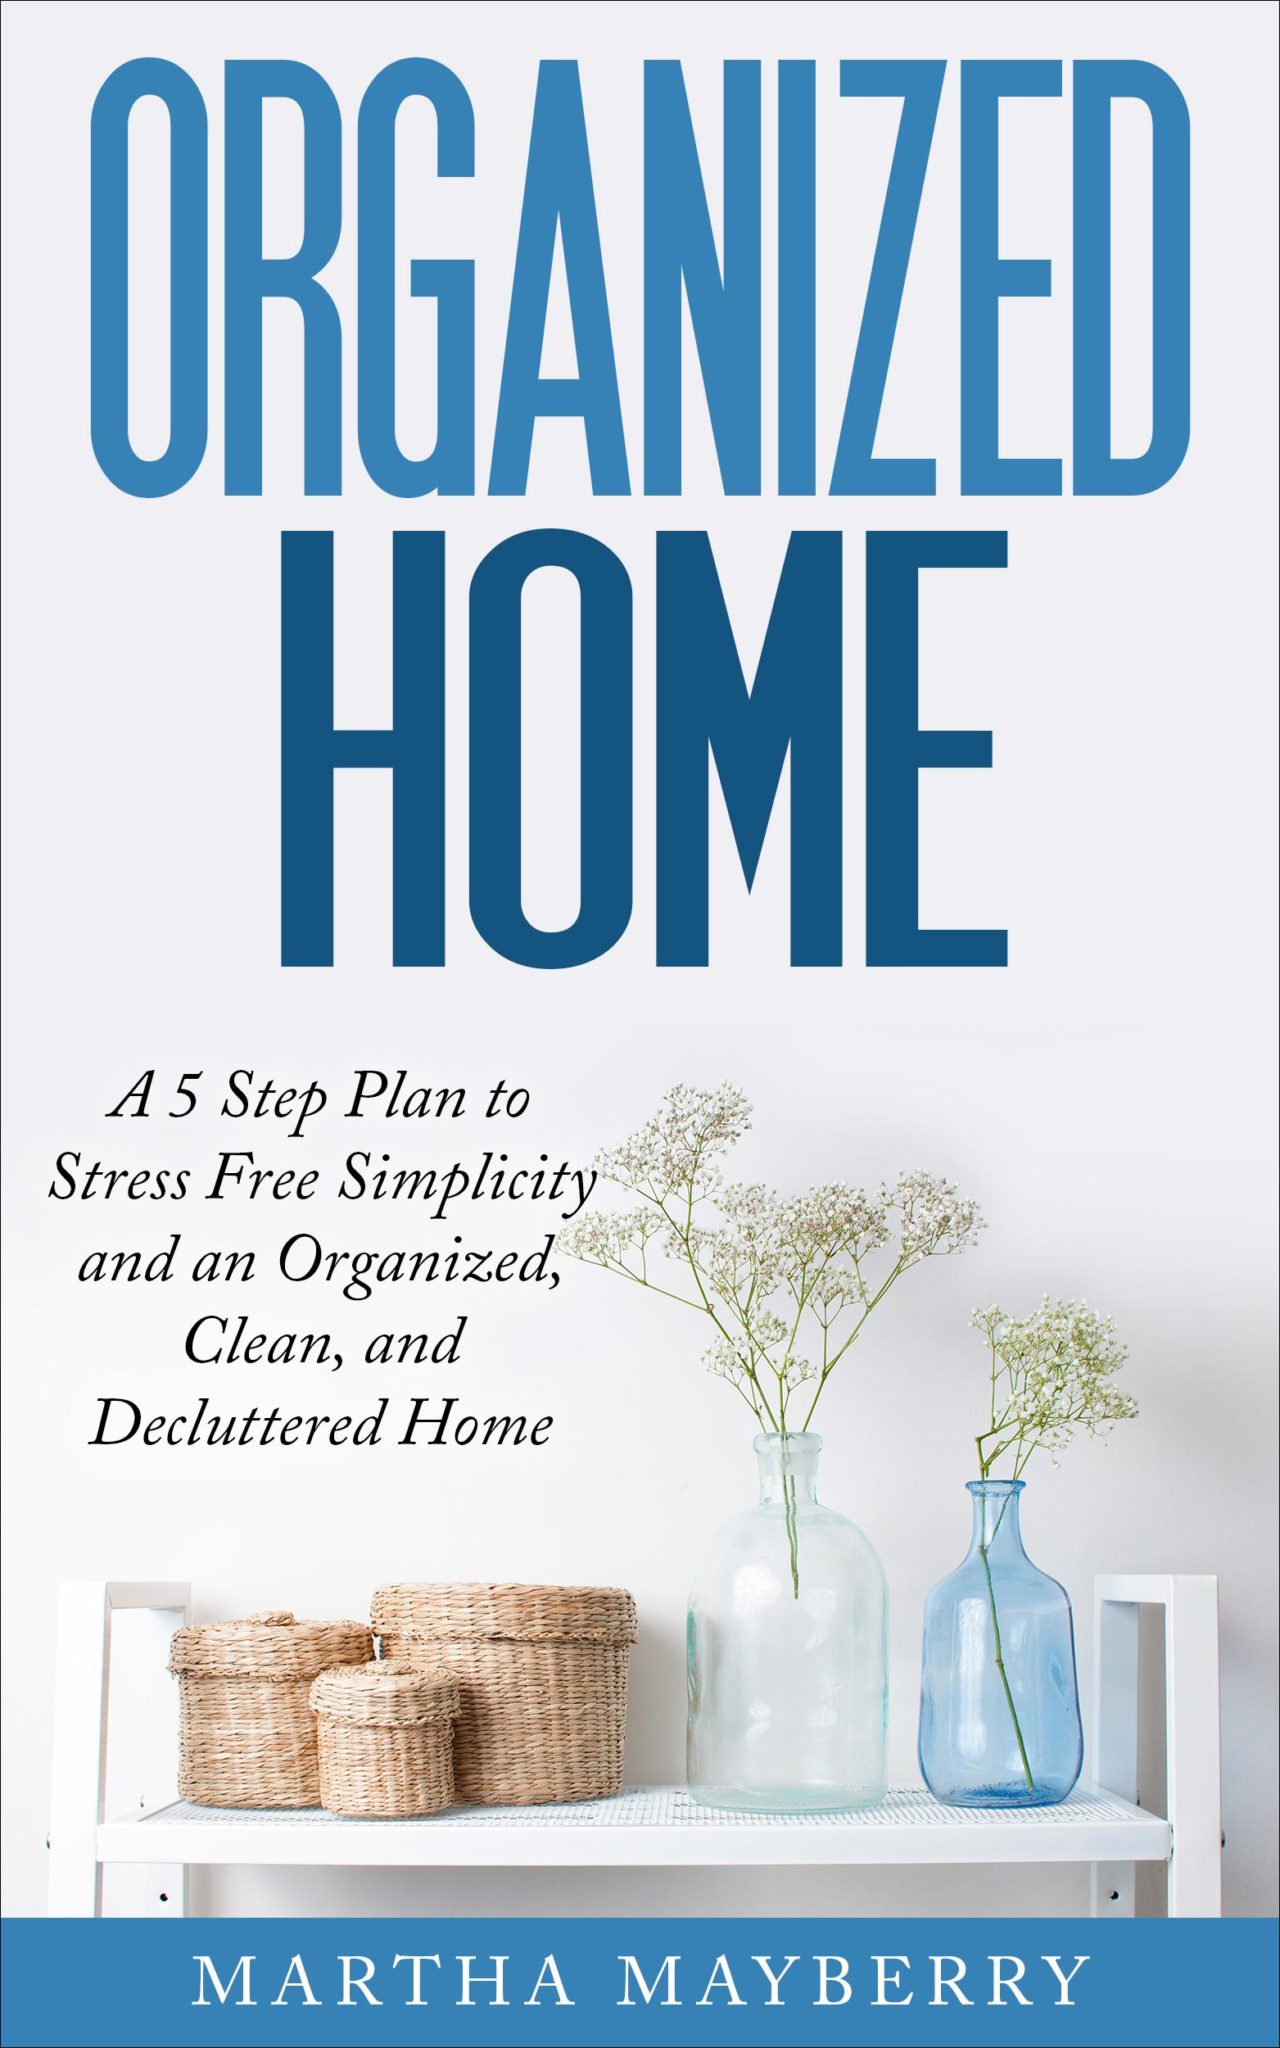 Organized Home: A 5 Step Plan to Stress Free Simplicity and an Organized, Clean, and Decluttered Home by Martha Mayberry